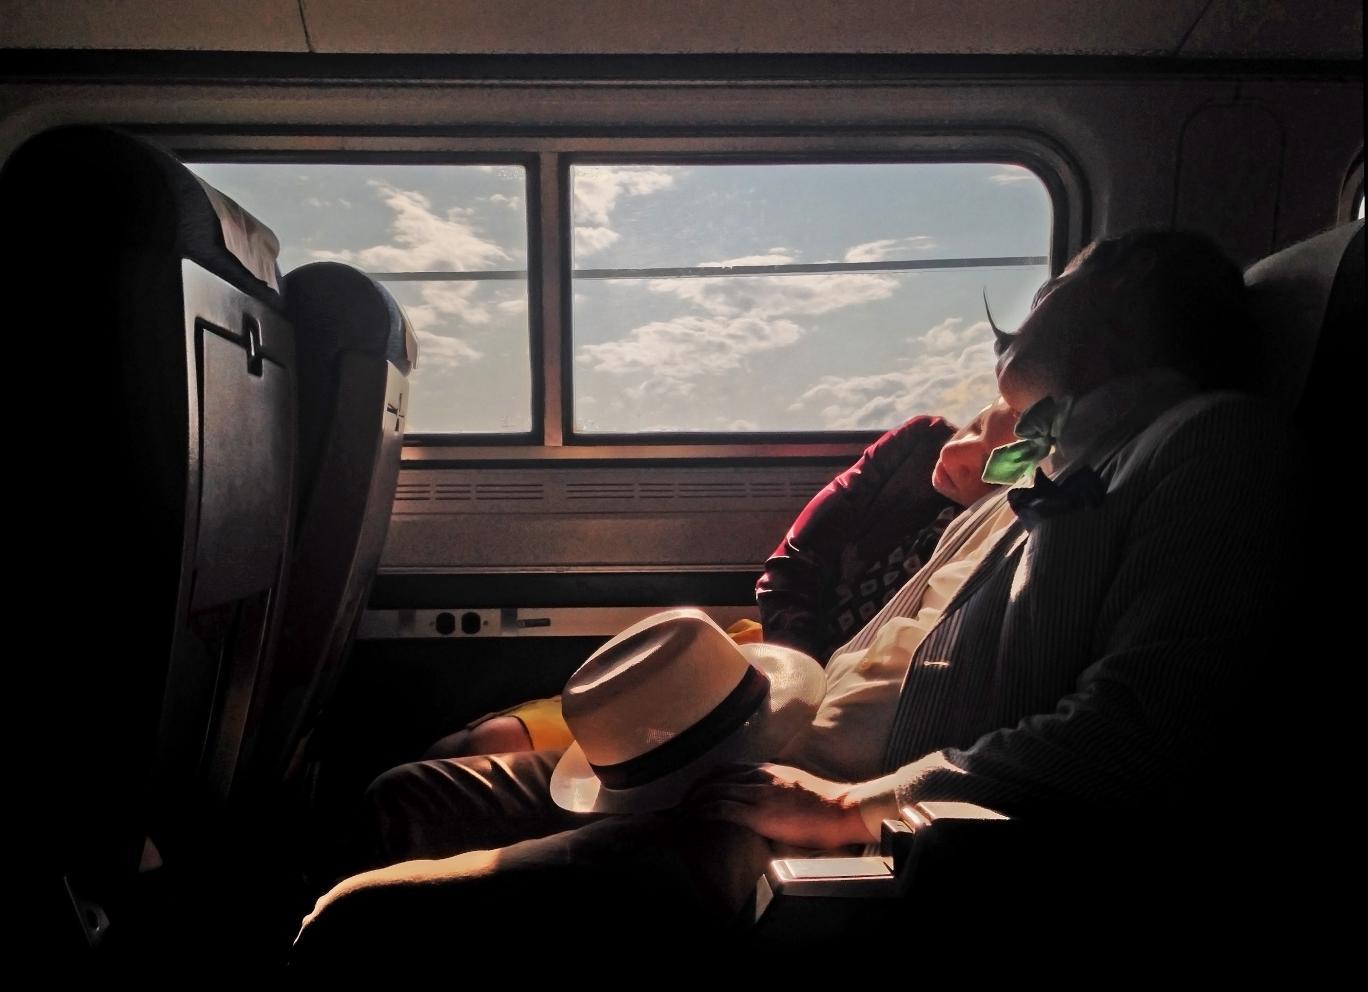 A photo by Yvonne Lu that came third in iPhone's photography of the year awards in 2015